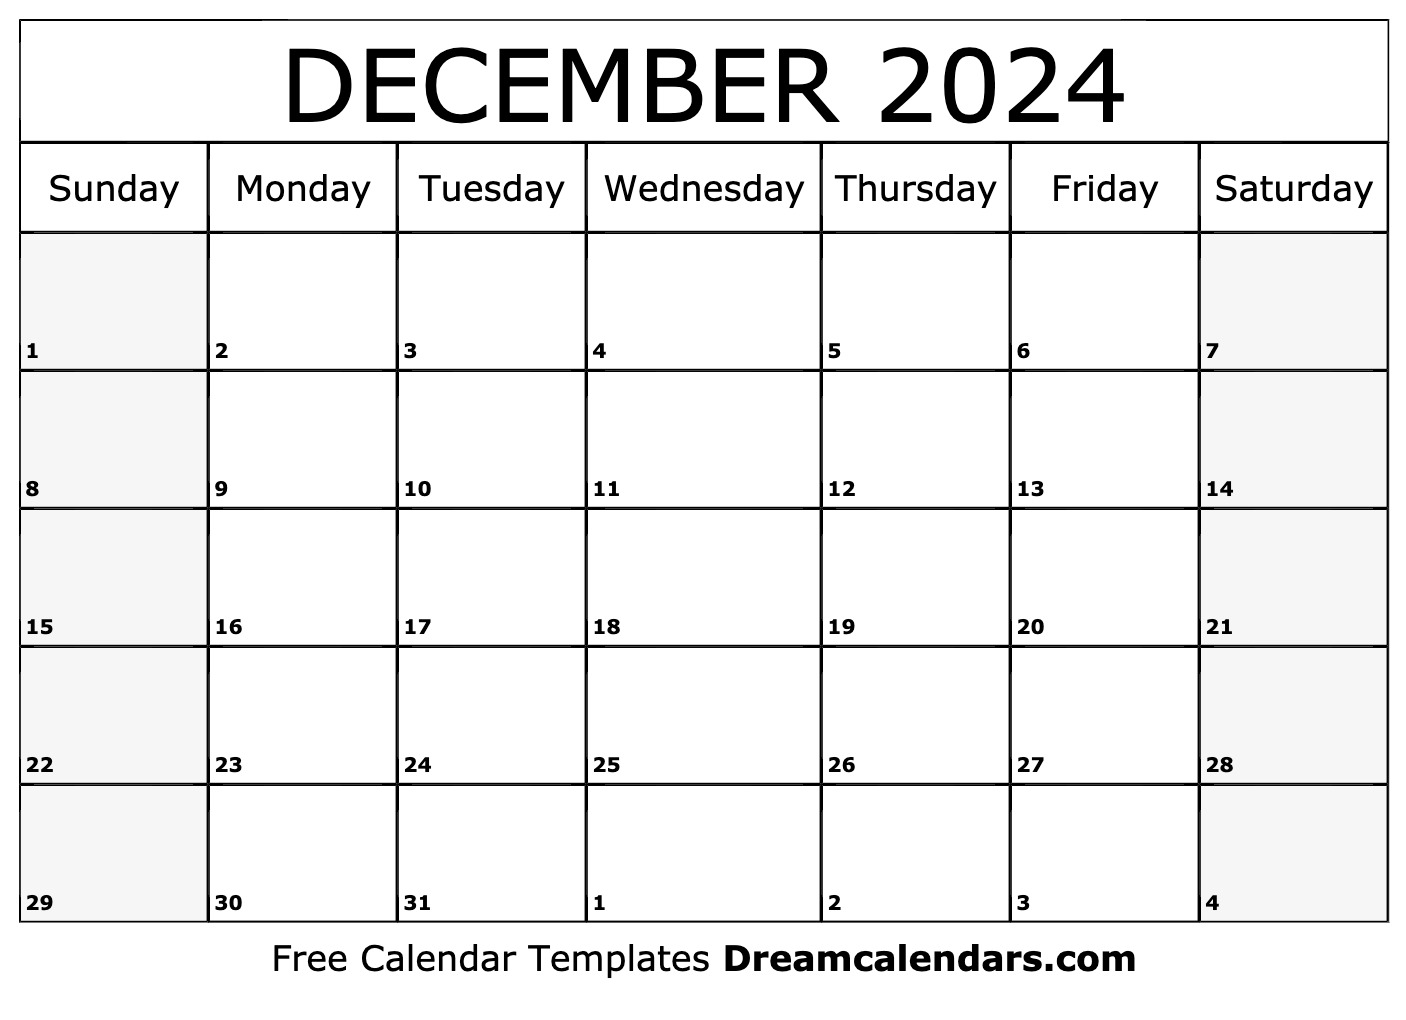 December 2024 Calendar Free Printable with Holidays and Observances